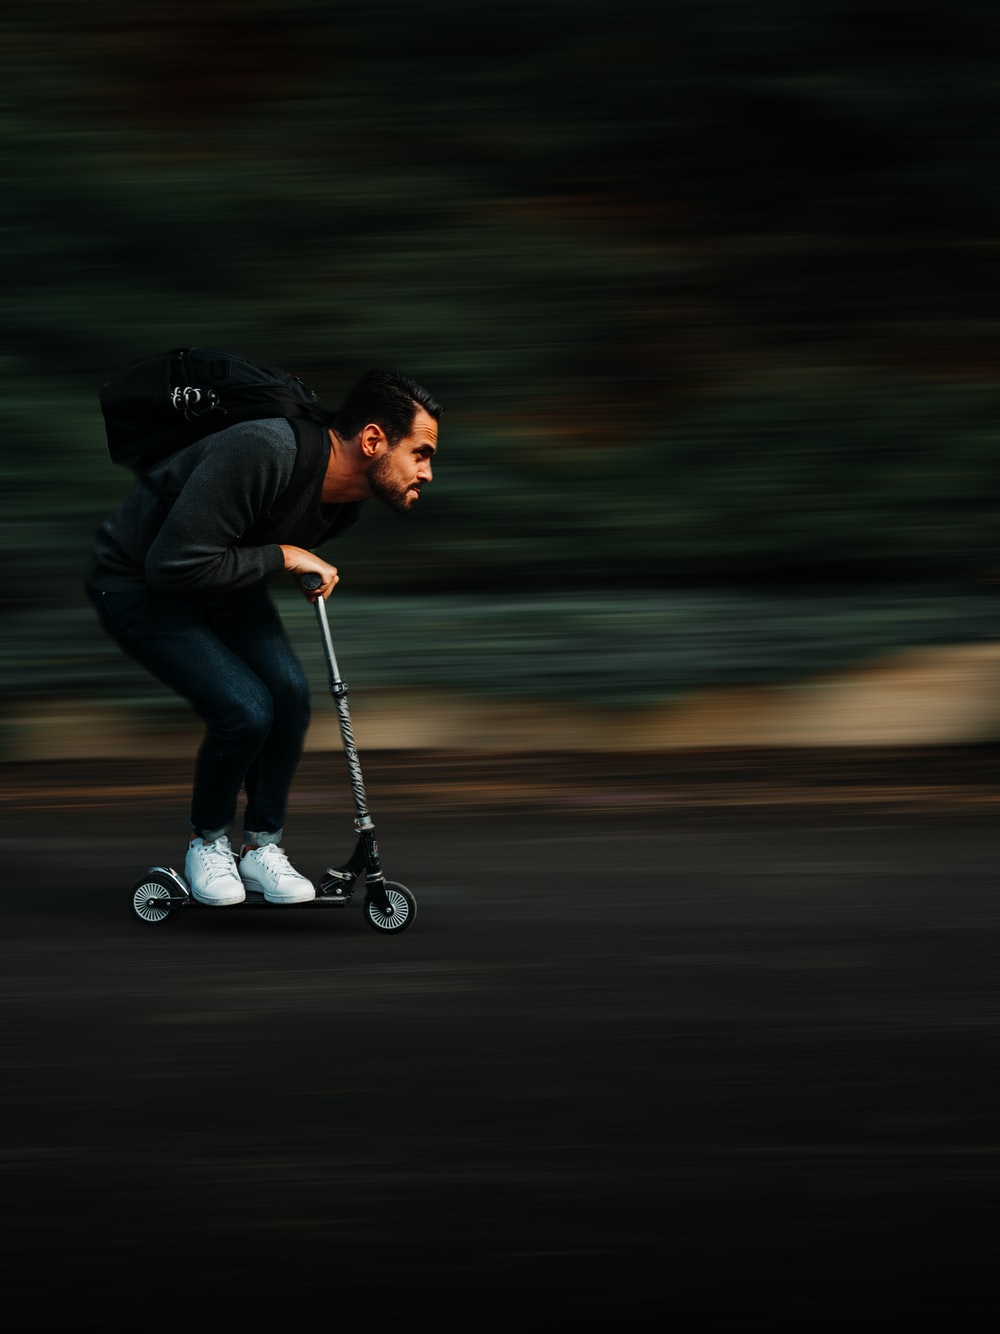 Kick Scooter Picture. Download Free Image